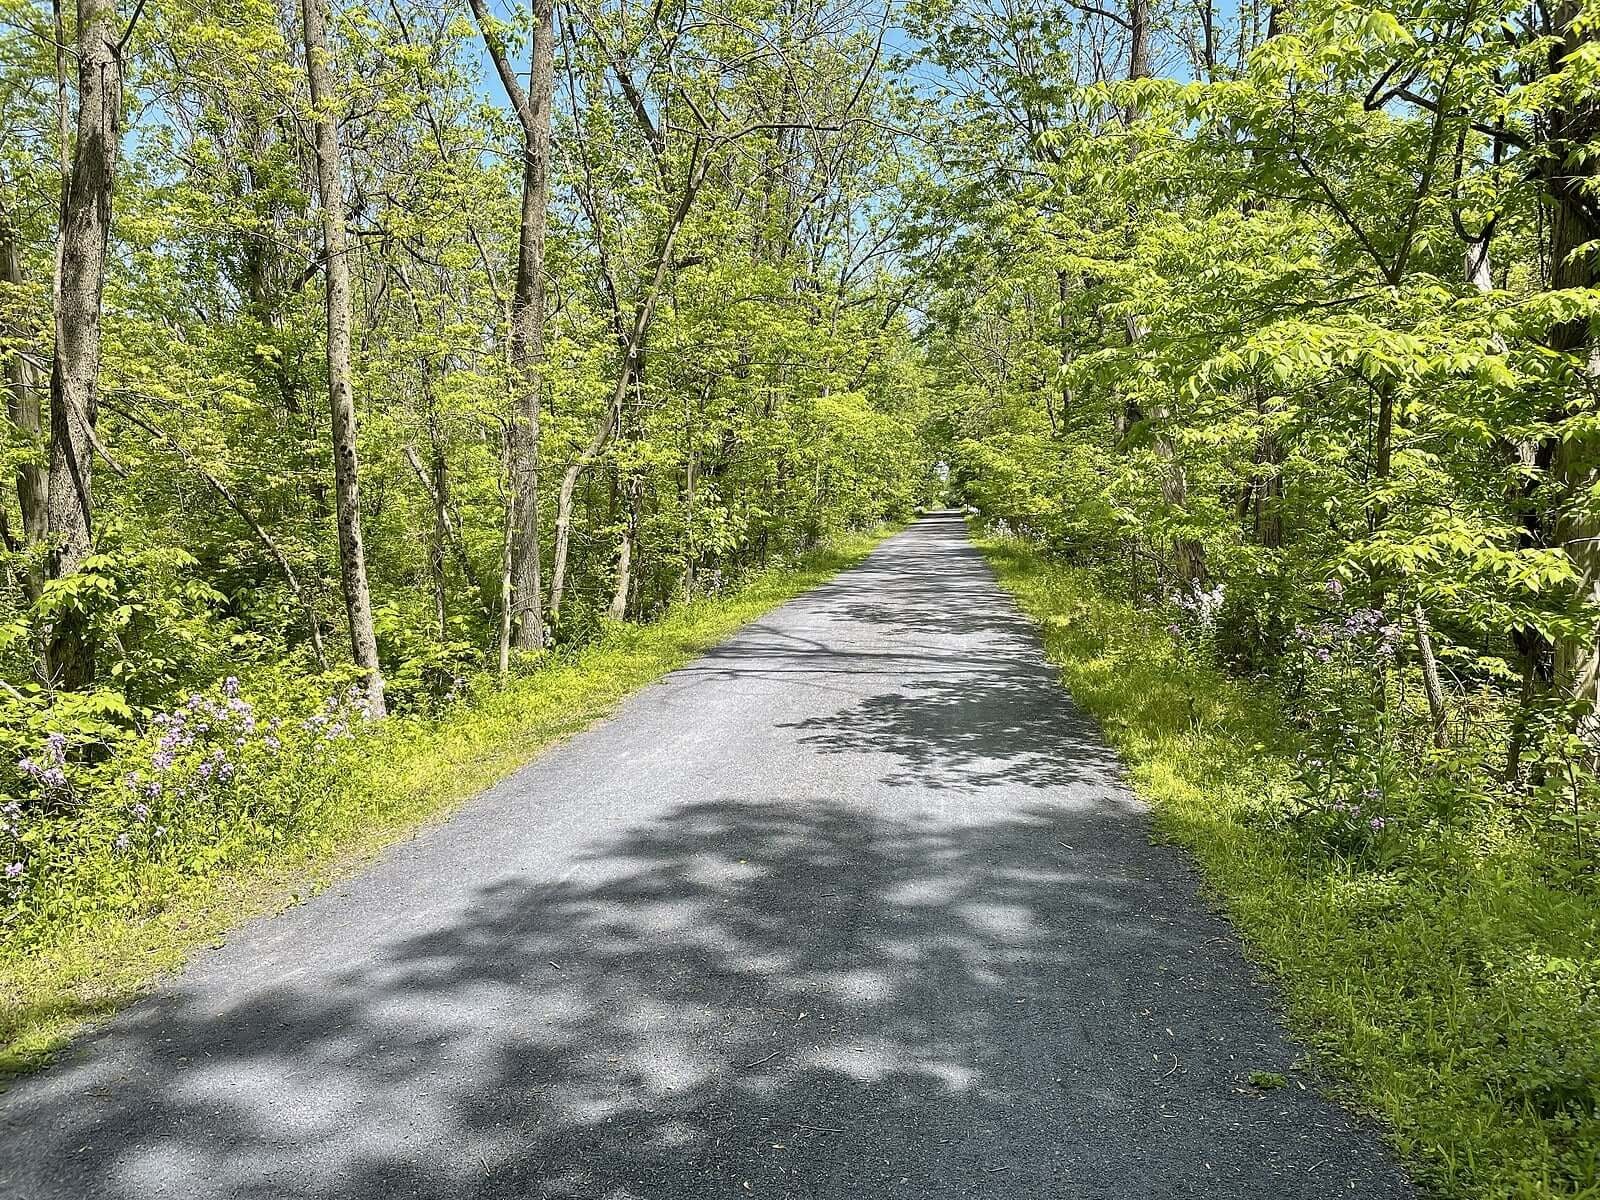 Light green trees and ground cover, including purple flowers, line the paved Perkiomen Trail through the Philadelphia countryside